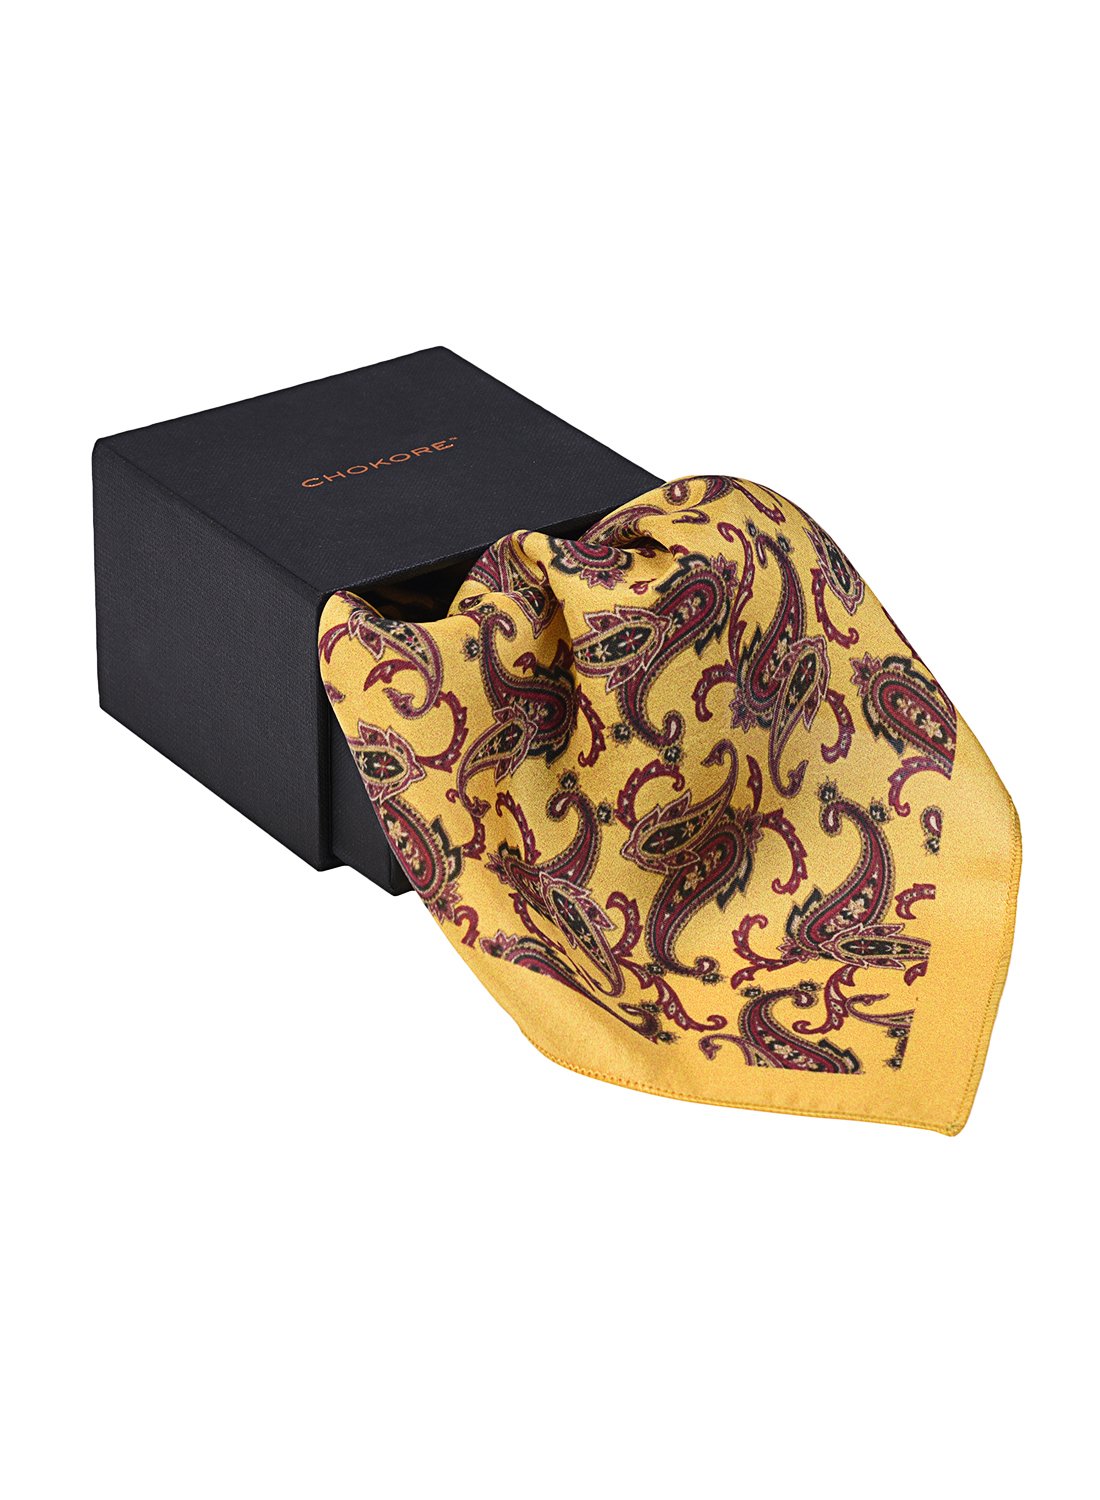 Chokore Tangerine & Burgundy Pocket Square from Indian at Heart collection